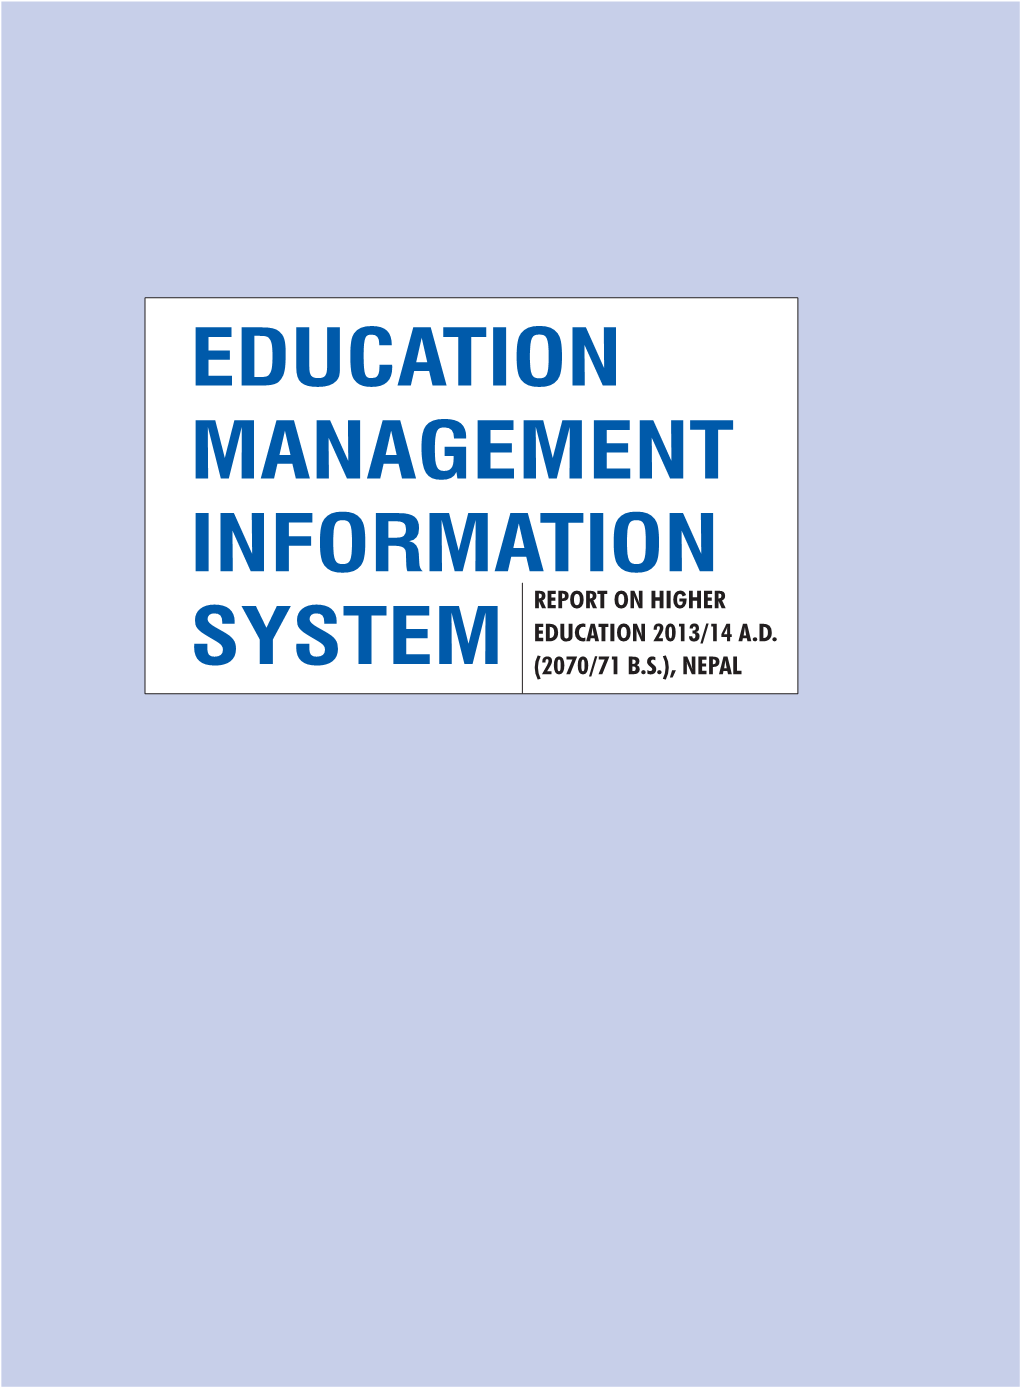 EDUCATION MANAGEMENT INFORMATION SYSTEM / Report on Higher Education 2013/14 A.D